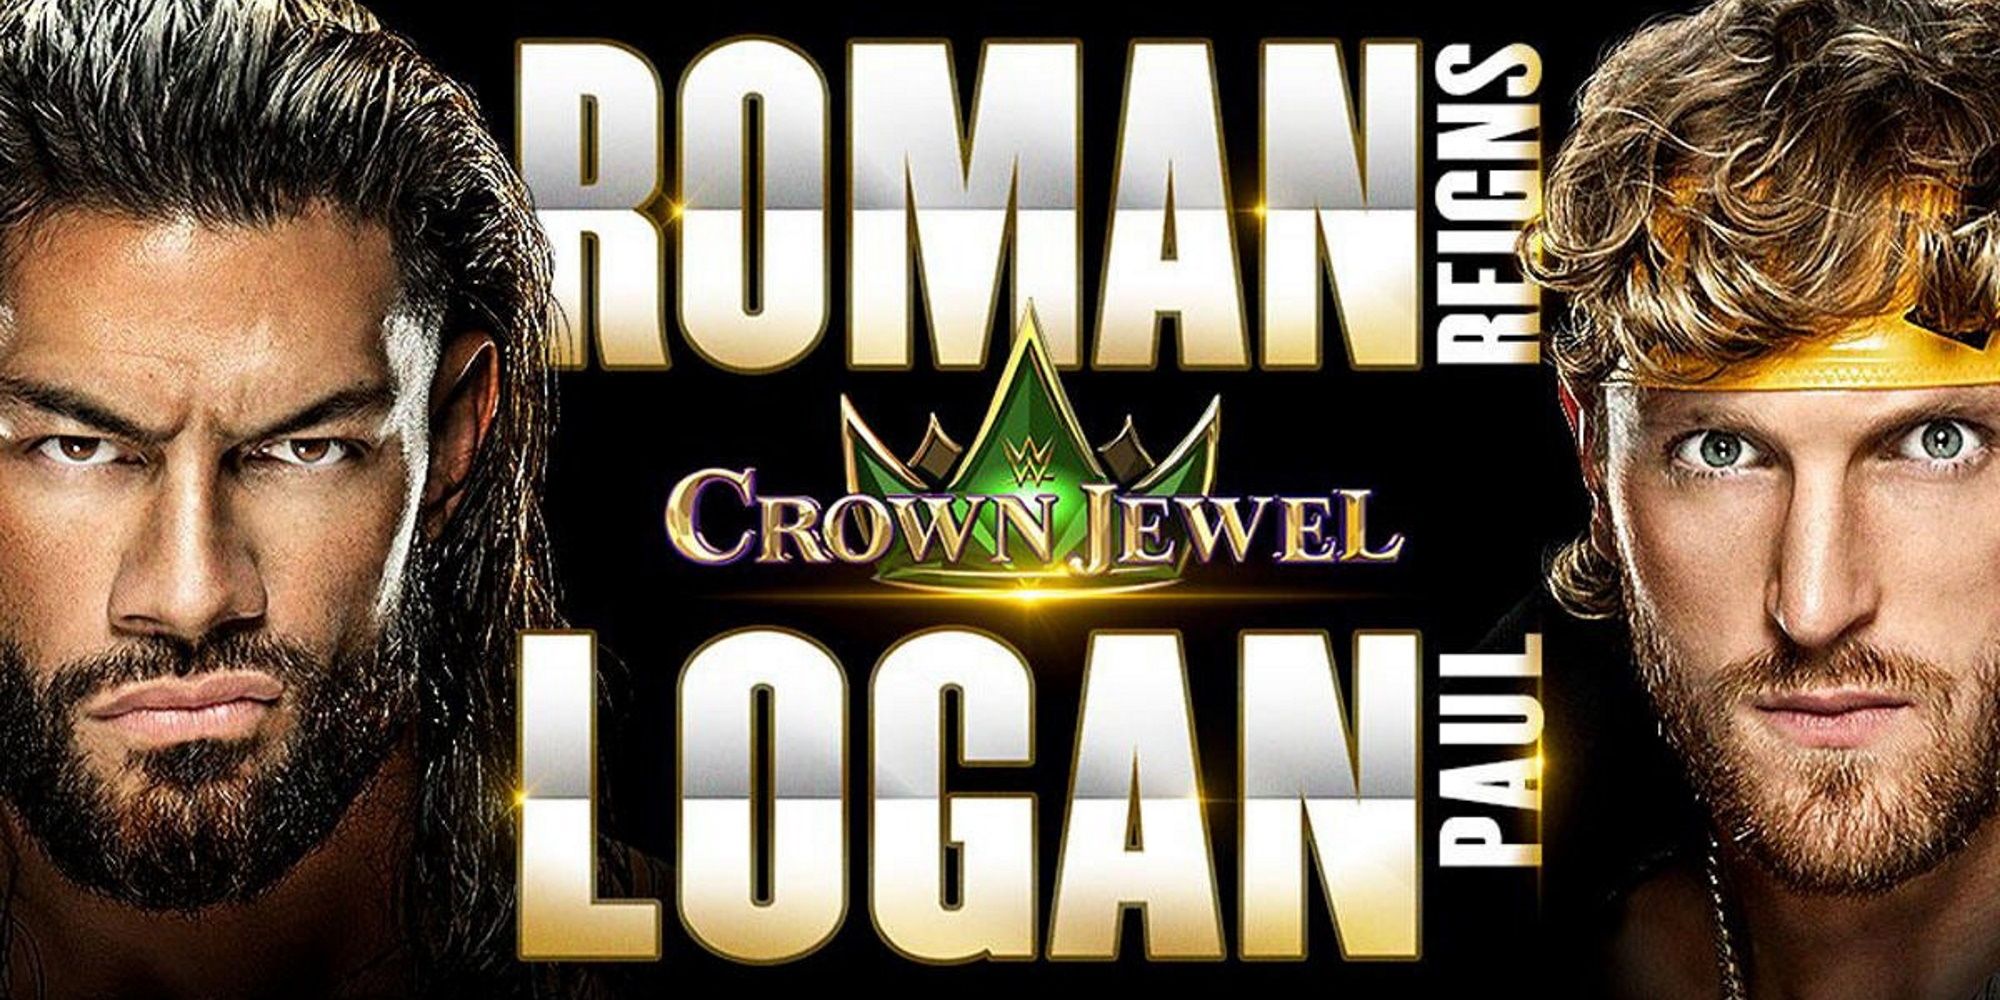 Logan Paul Will Take On Roman Reigns For The WWE Championship Title